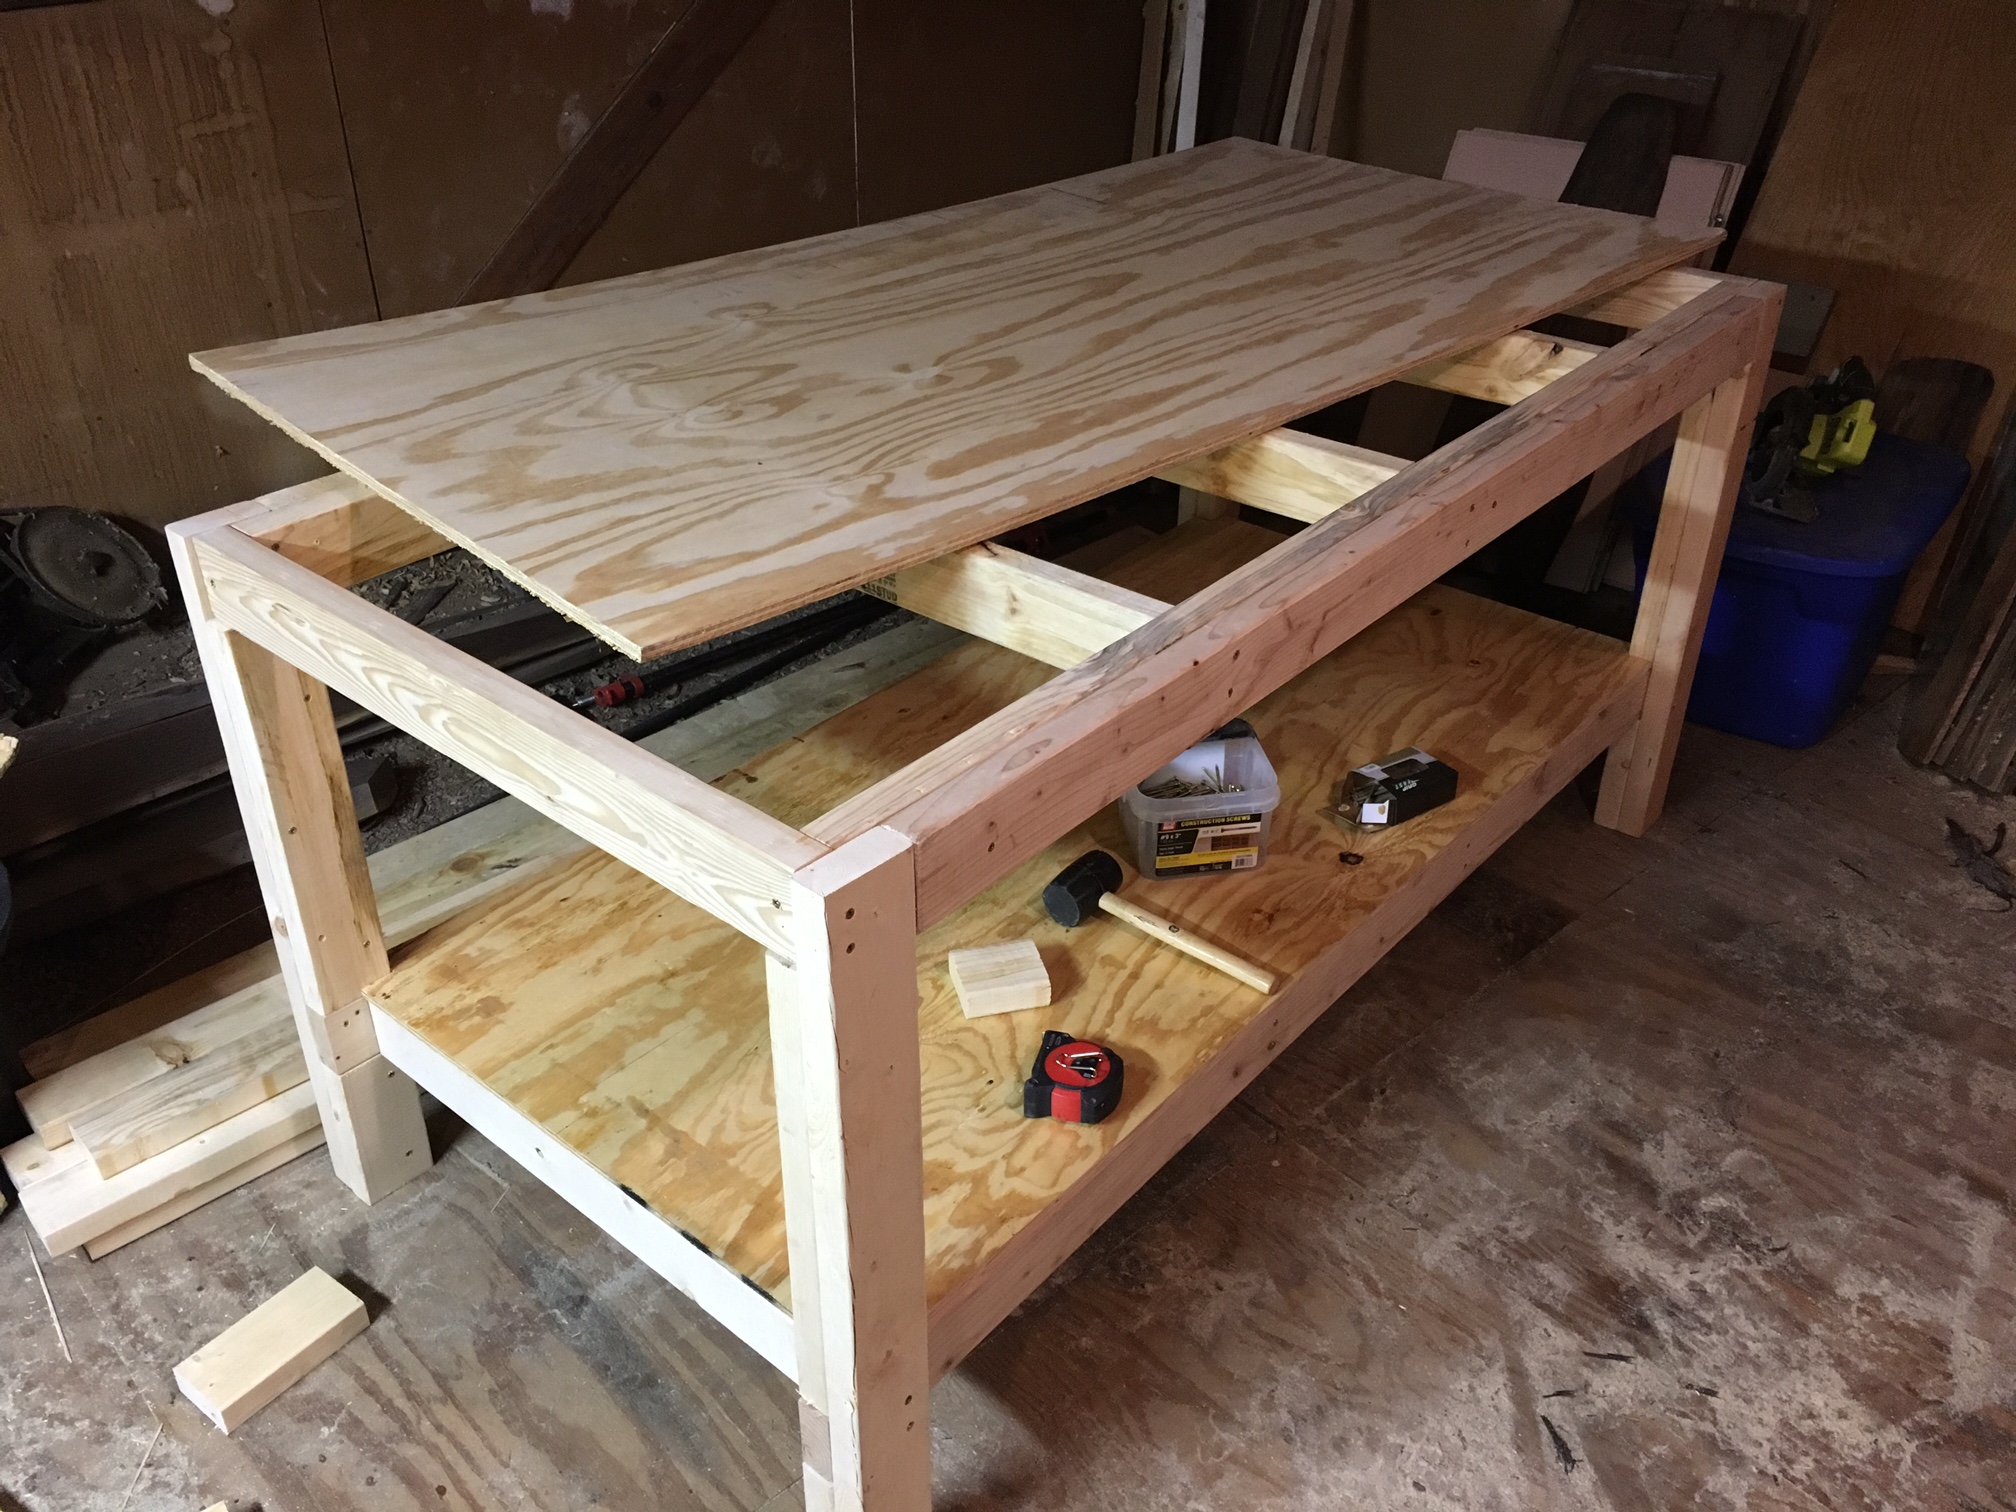 Woodworking table construction